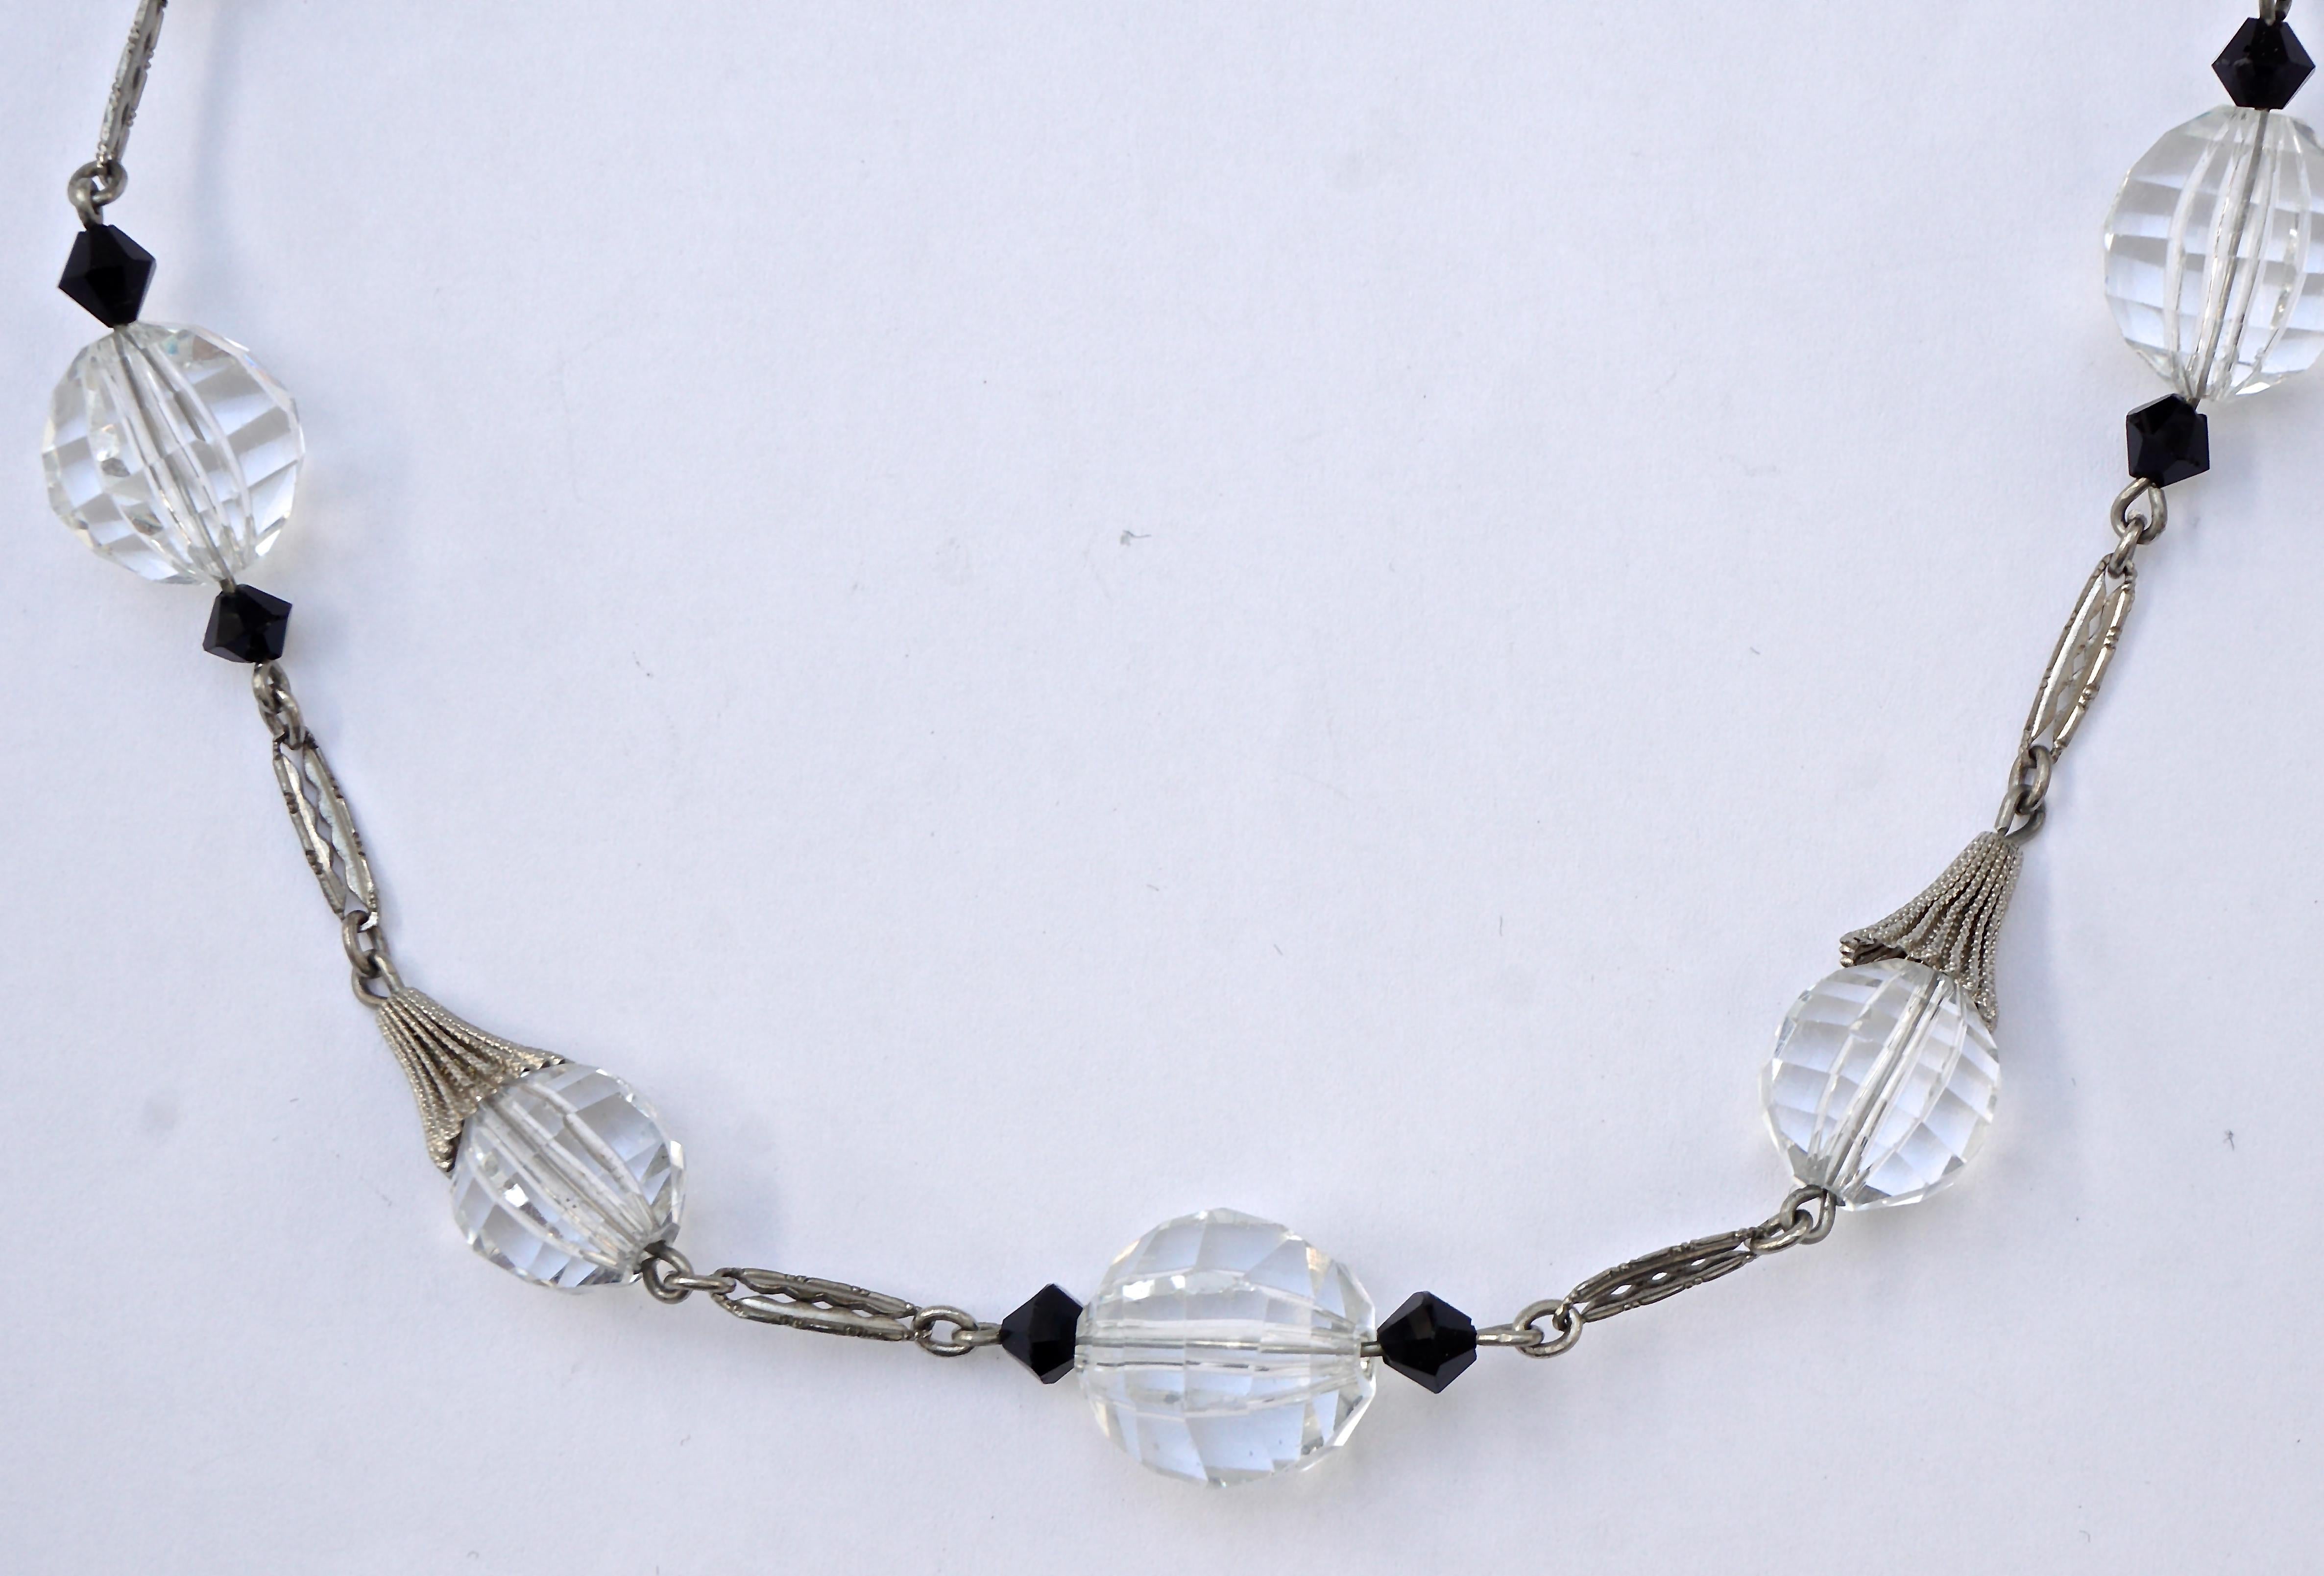 
Beautiful Art Deco necklace with black and clear faceted glass beads and a barrel clasp, circa 1930s, and length 43.8cm / 17.24 inches. The silver tone metal links have a typical Art Deco design. The centre clear glass stone is 1.45cm / .57 inch